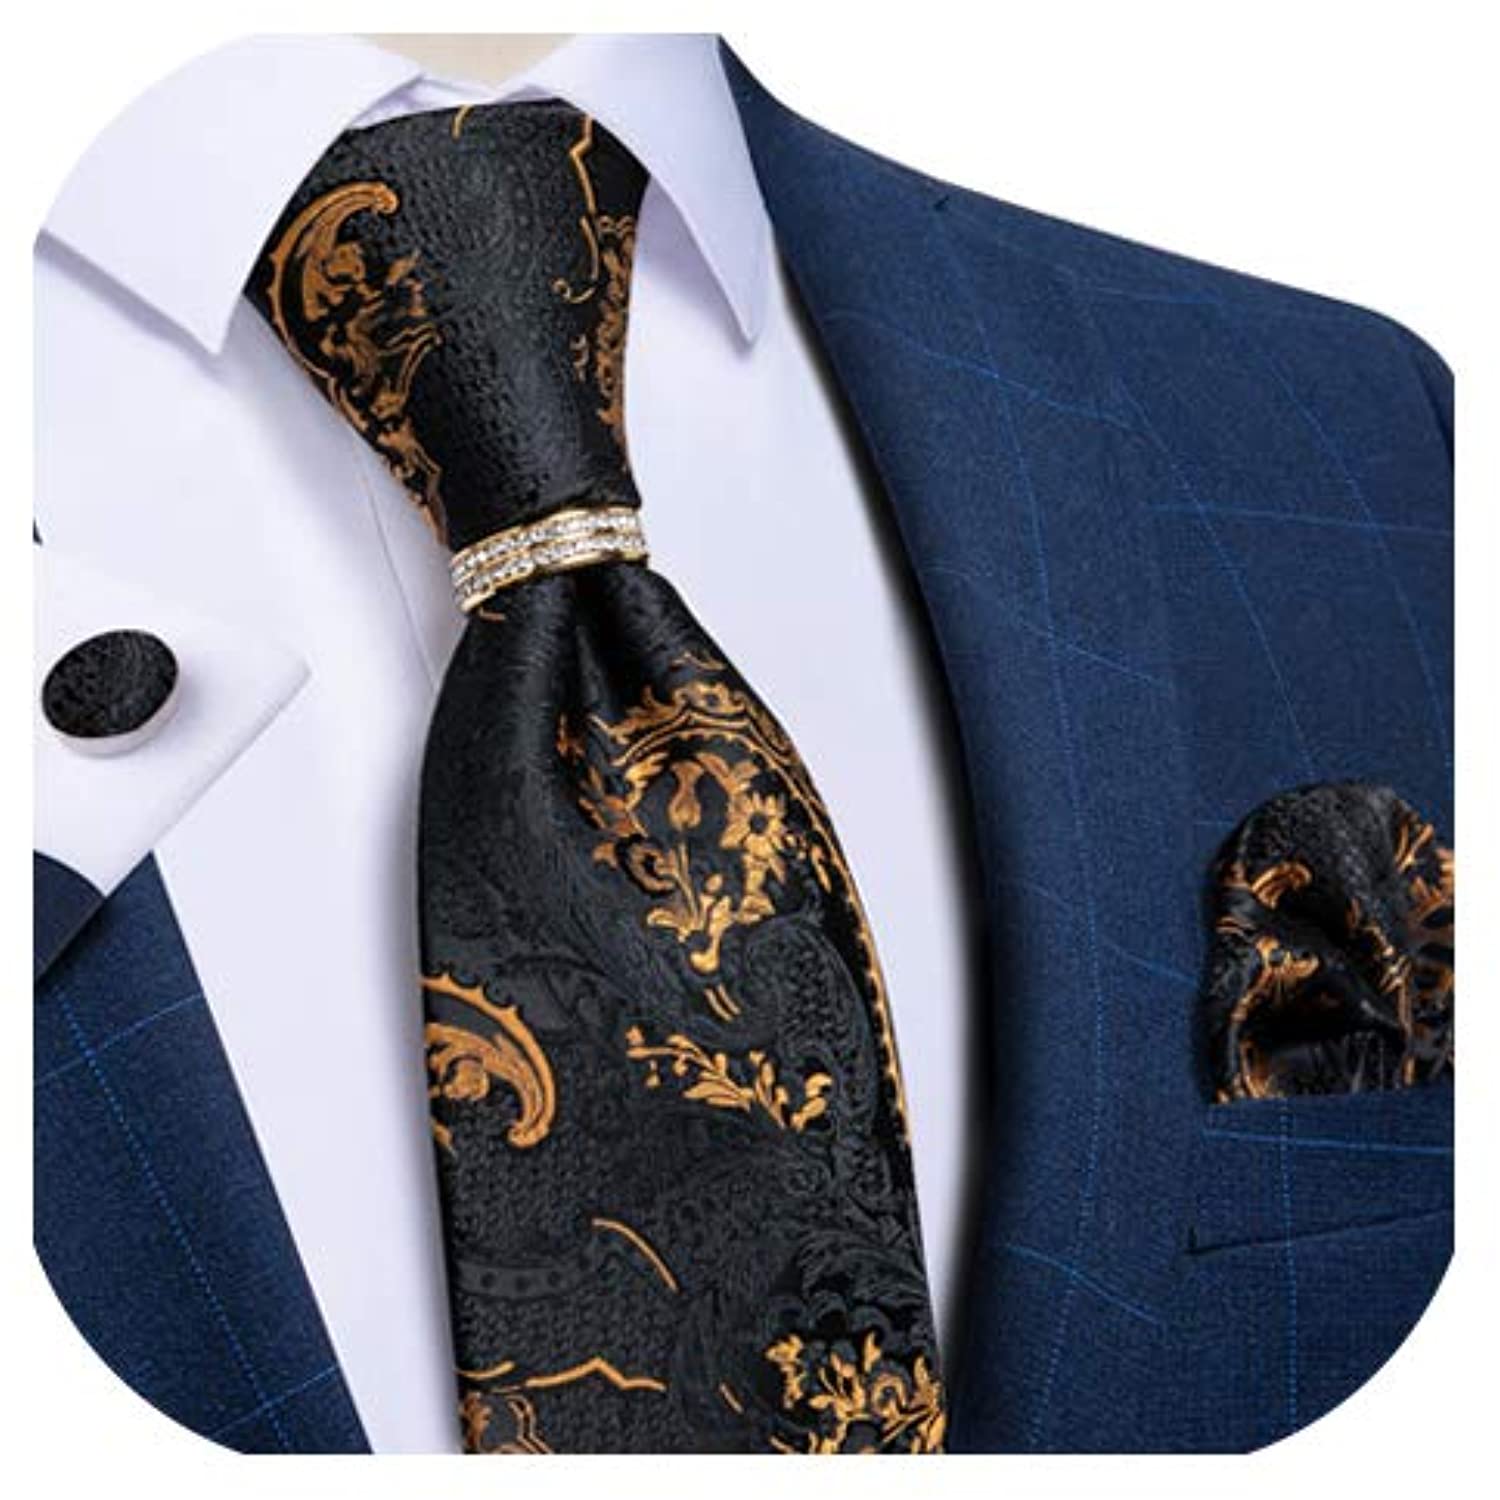 Deji & Kola on X: A French Suit, matching silk patterned pocket square  with medallion detailing for men of style. To order send DM or WhatsApp  08037292344. #ThrusdayMotivation #ThursdayThoughts #thursdayvibes  #thursdaymorning  /